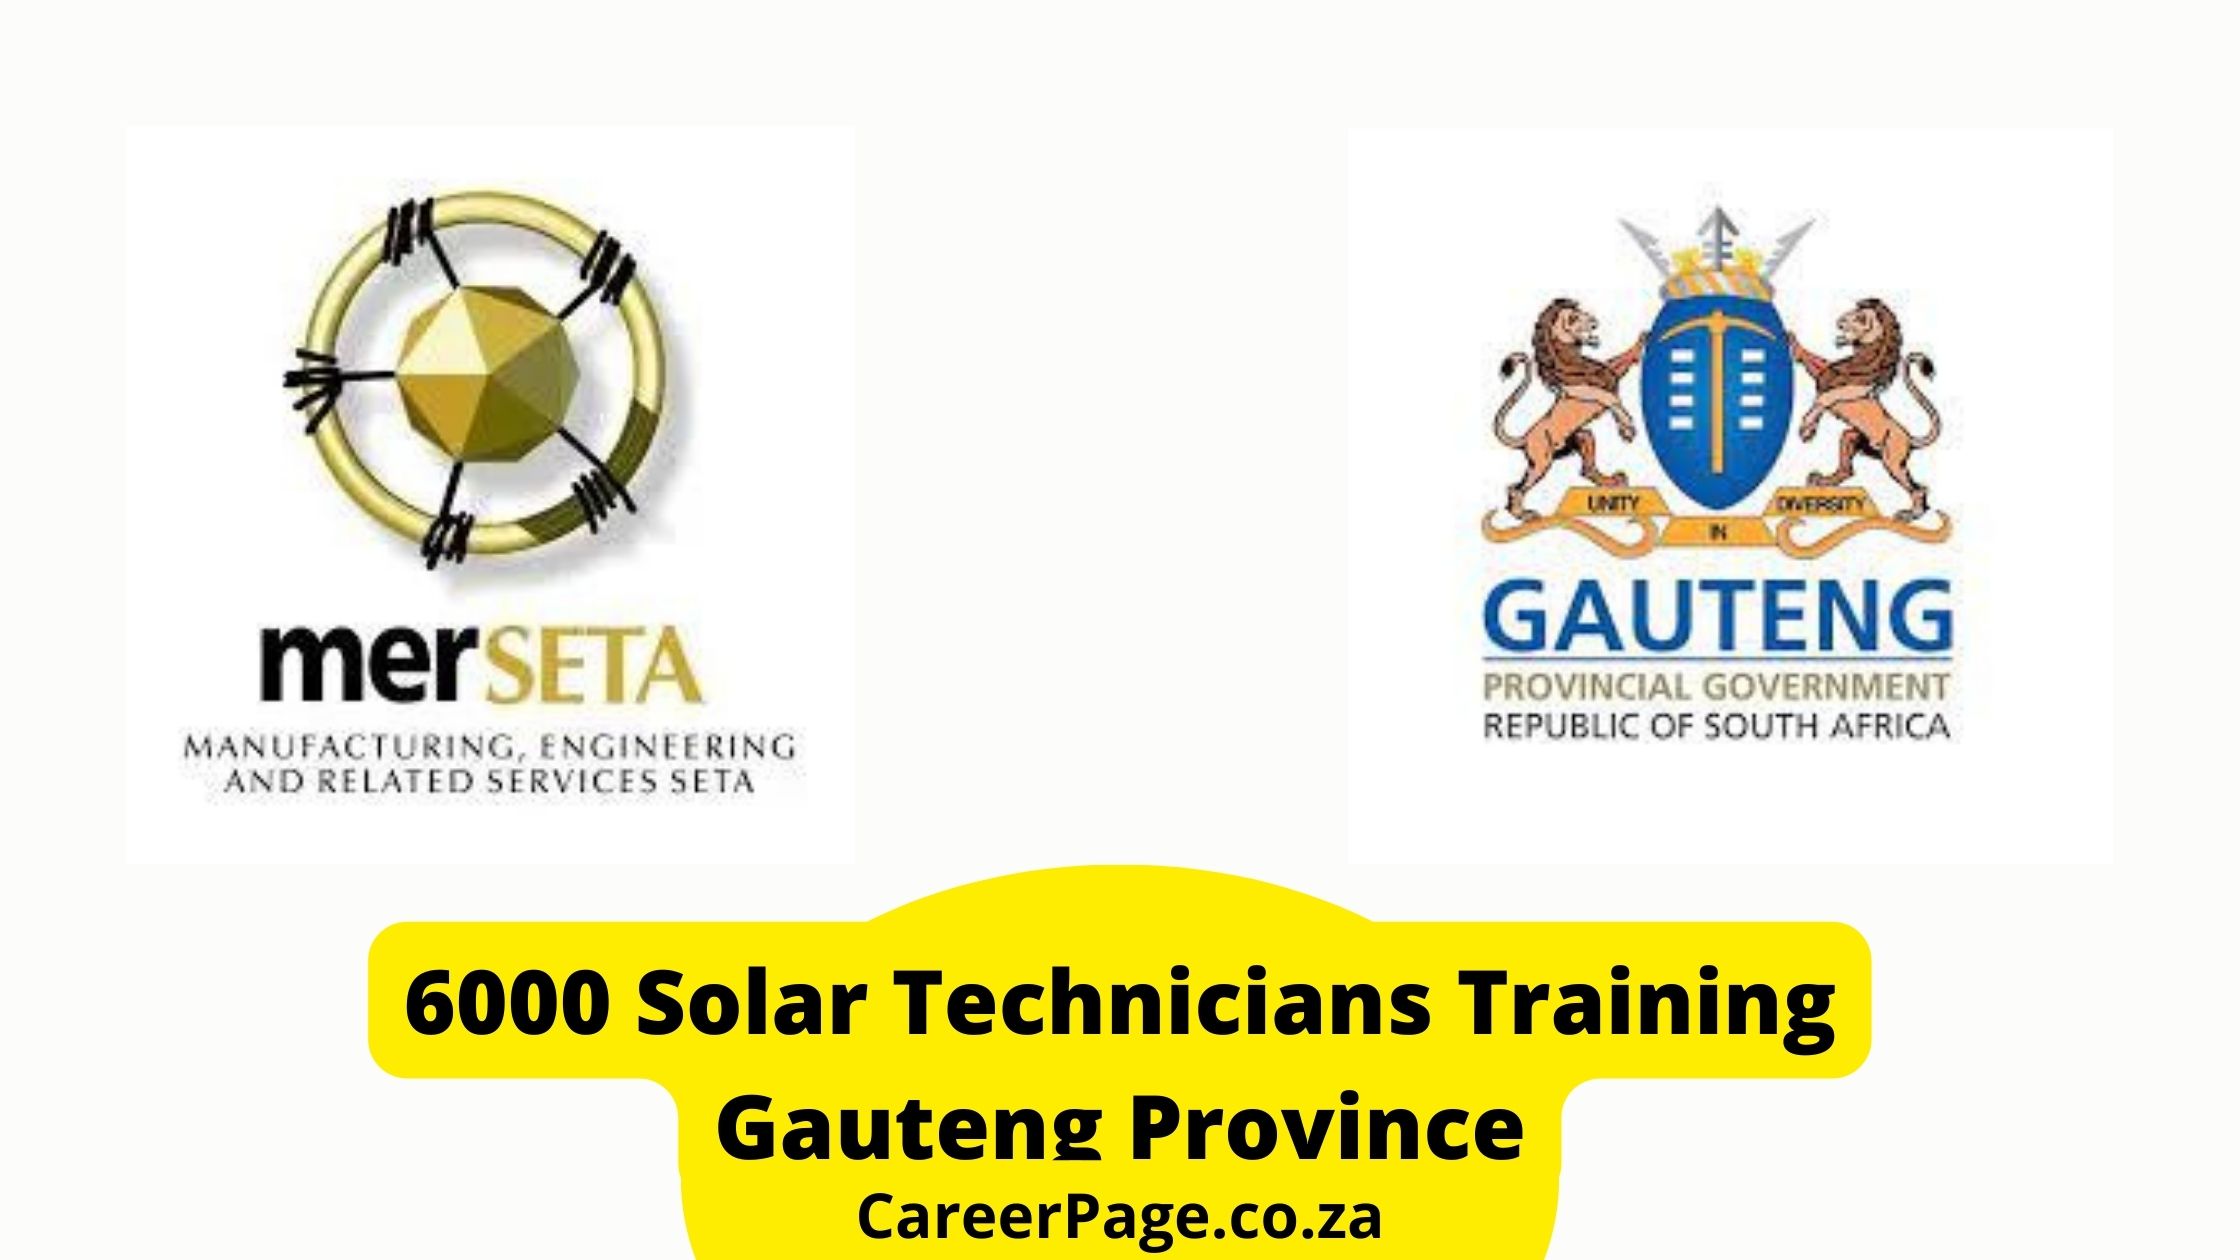 MERSETA together with Gauteng Province is recruiting 6000 youth